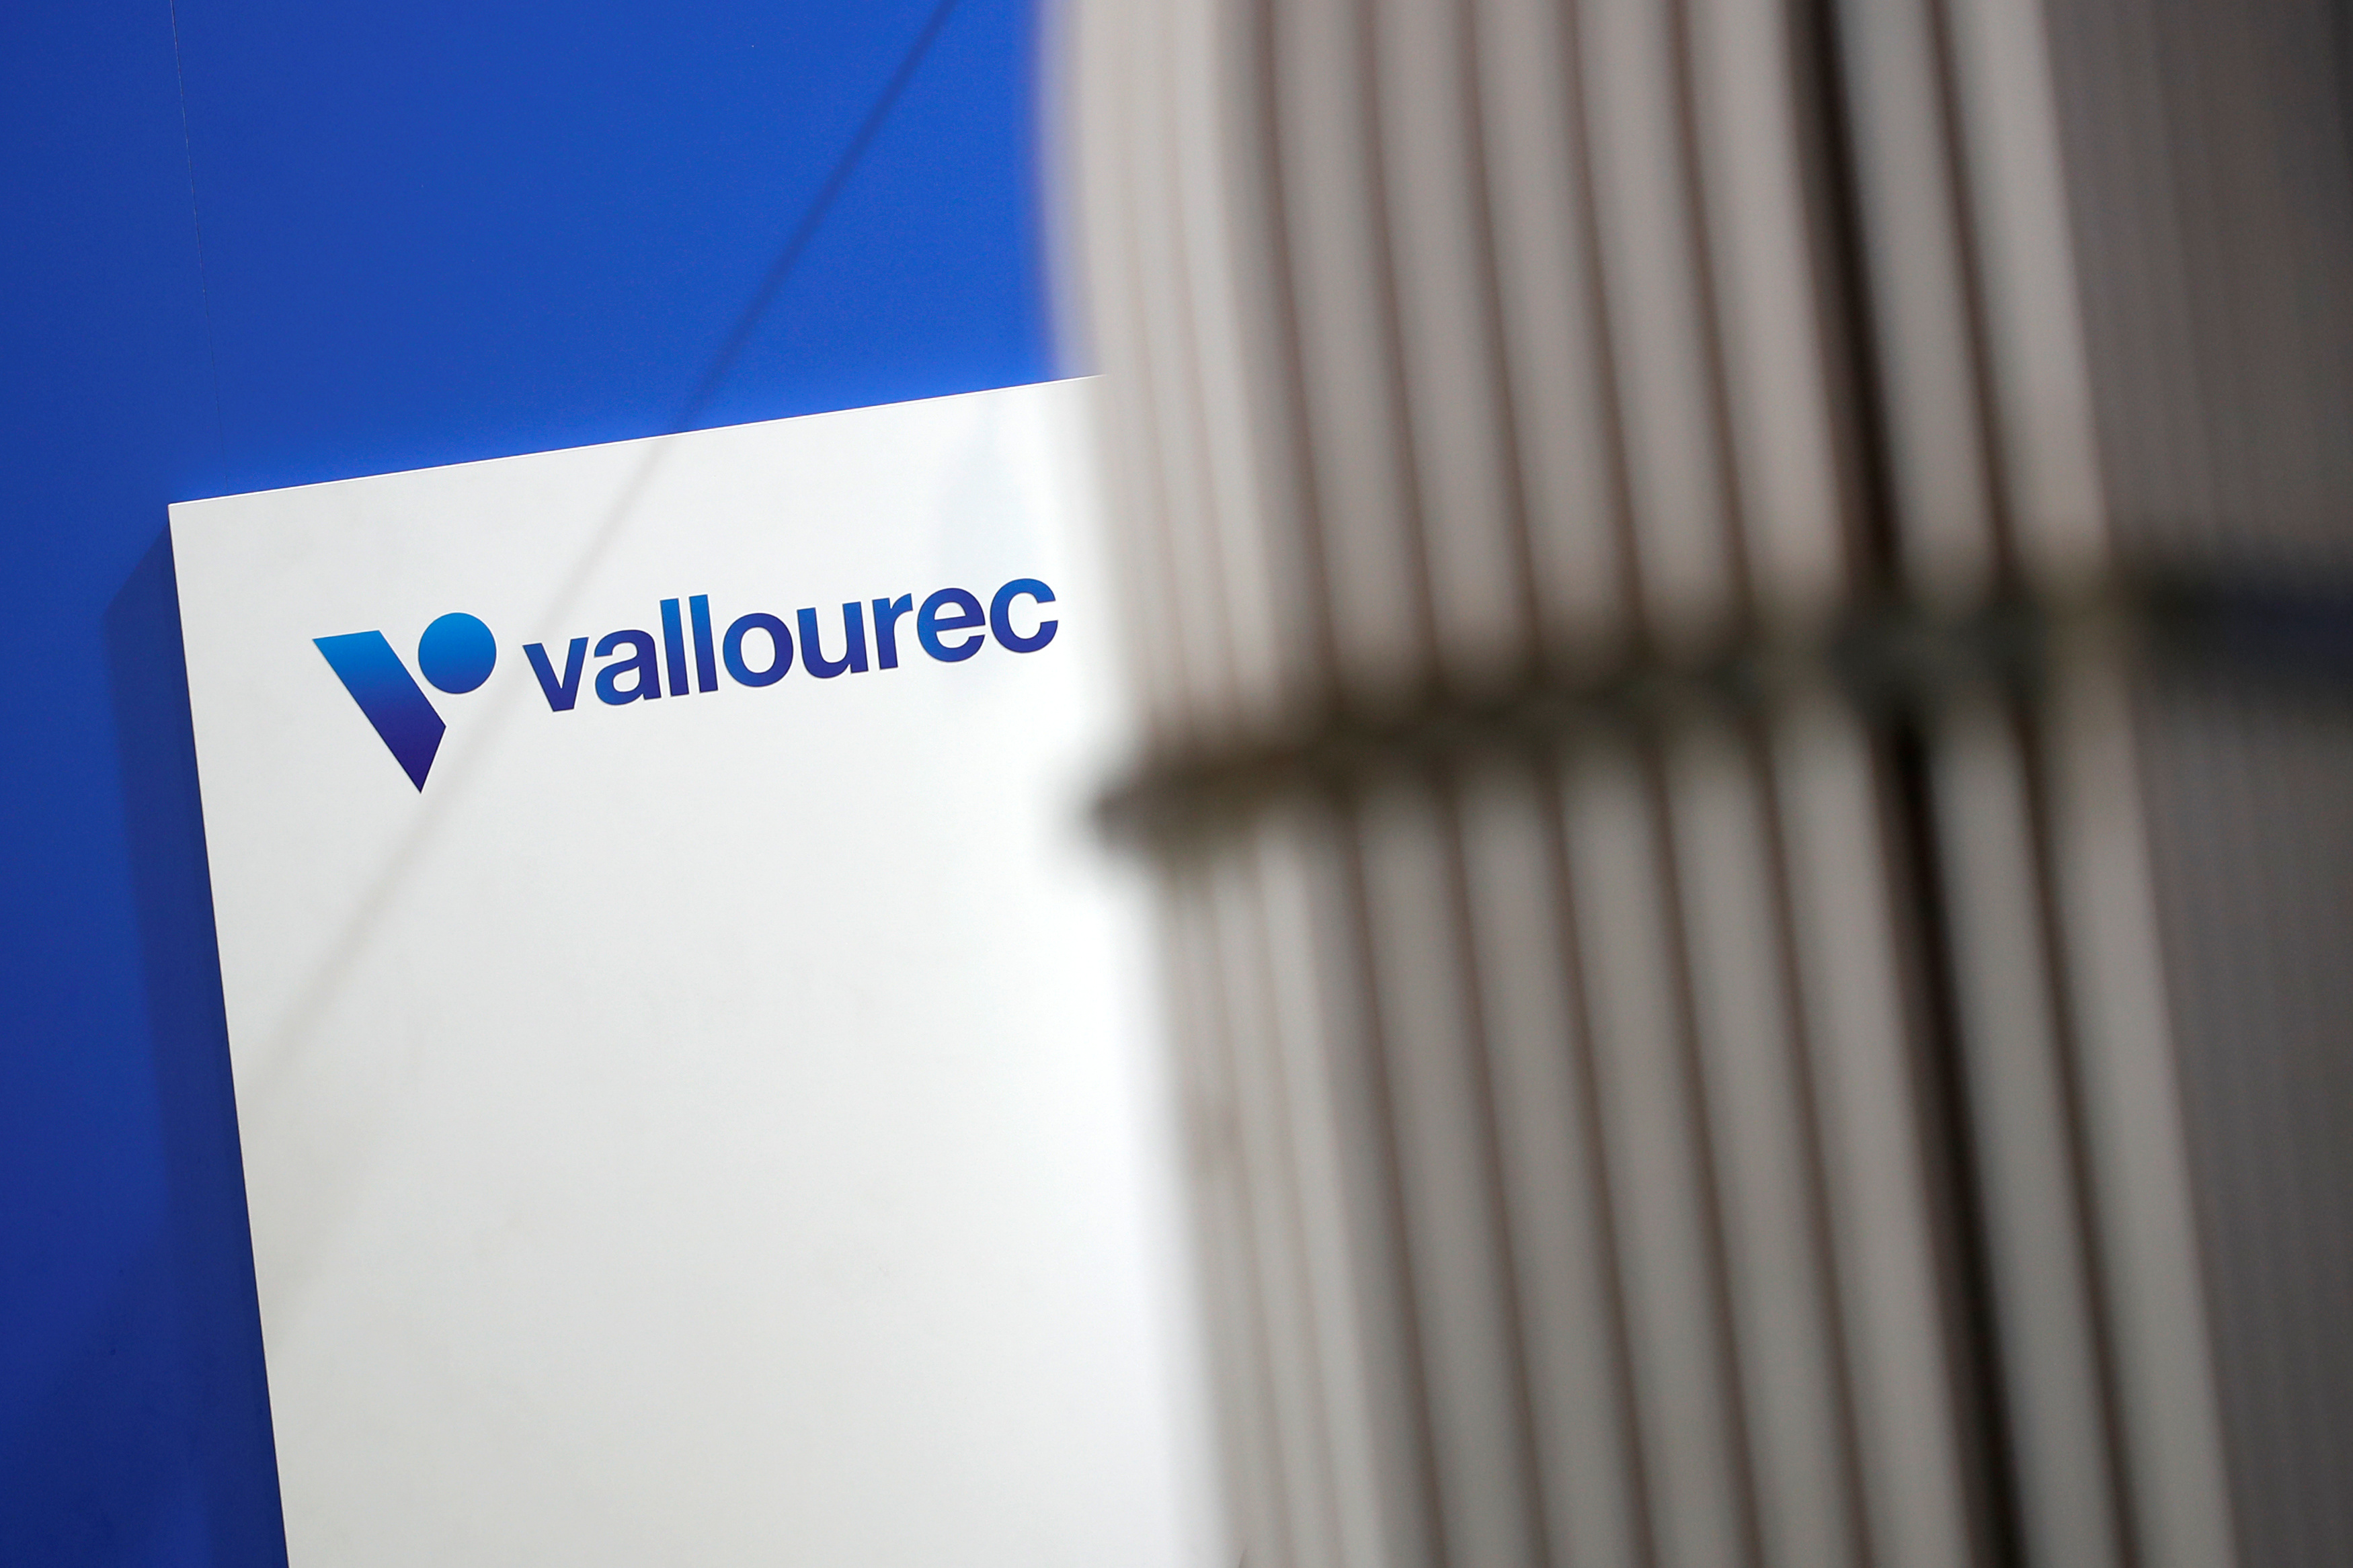 The logo of Vallourec is pictured at the World Nuclear Exhibition (WNE), the trade fair event for the global nuclear community in Villepinte near Paris